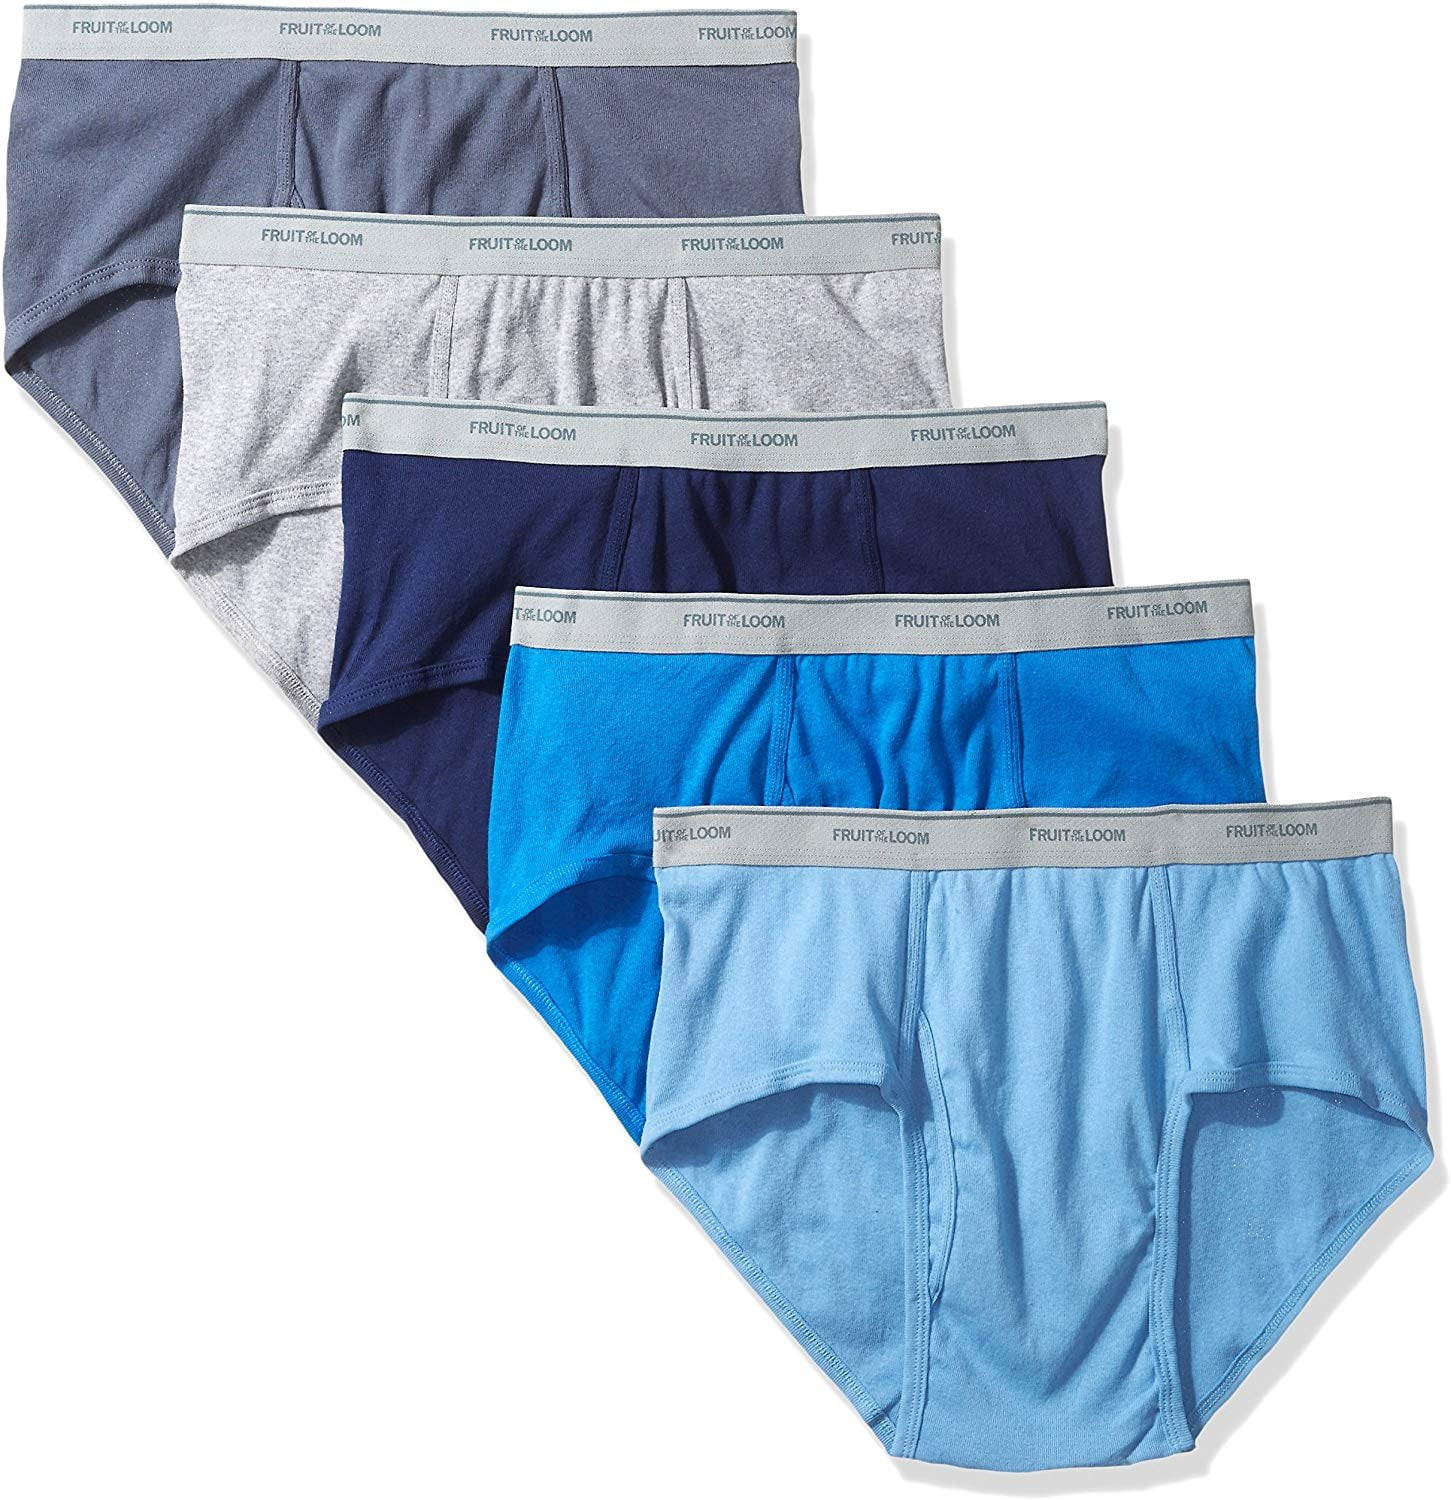 Fruit of the Loom 5pk Fashion Briefs, Large, Colors May Vary, Assorted ...